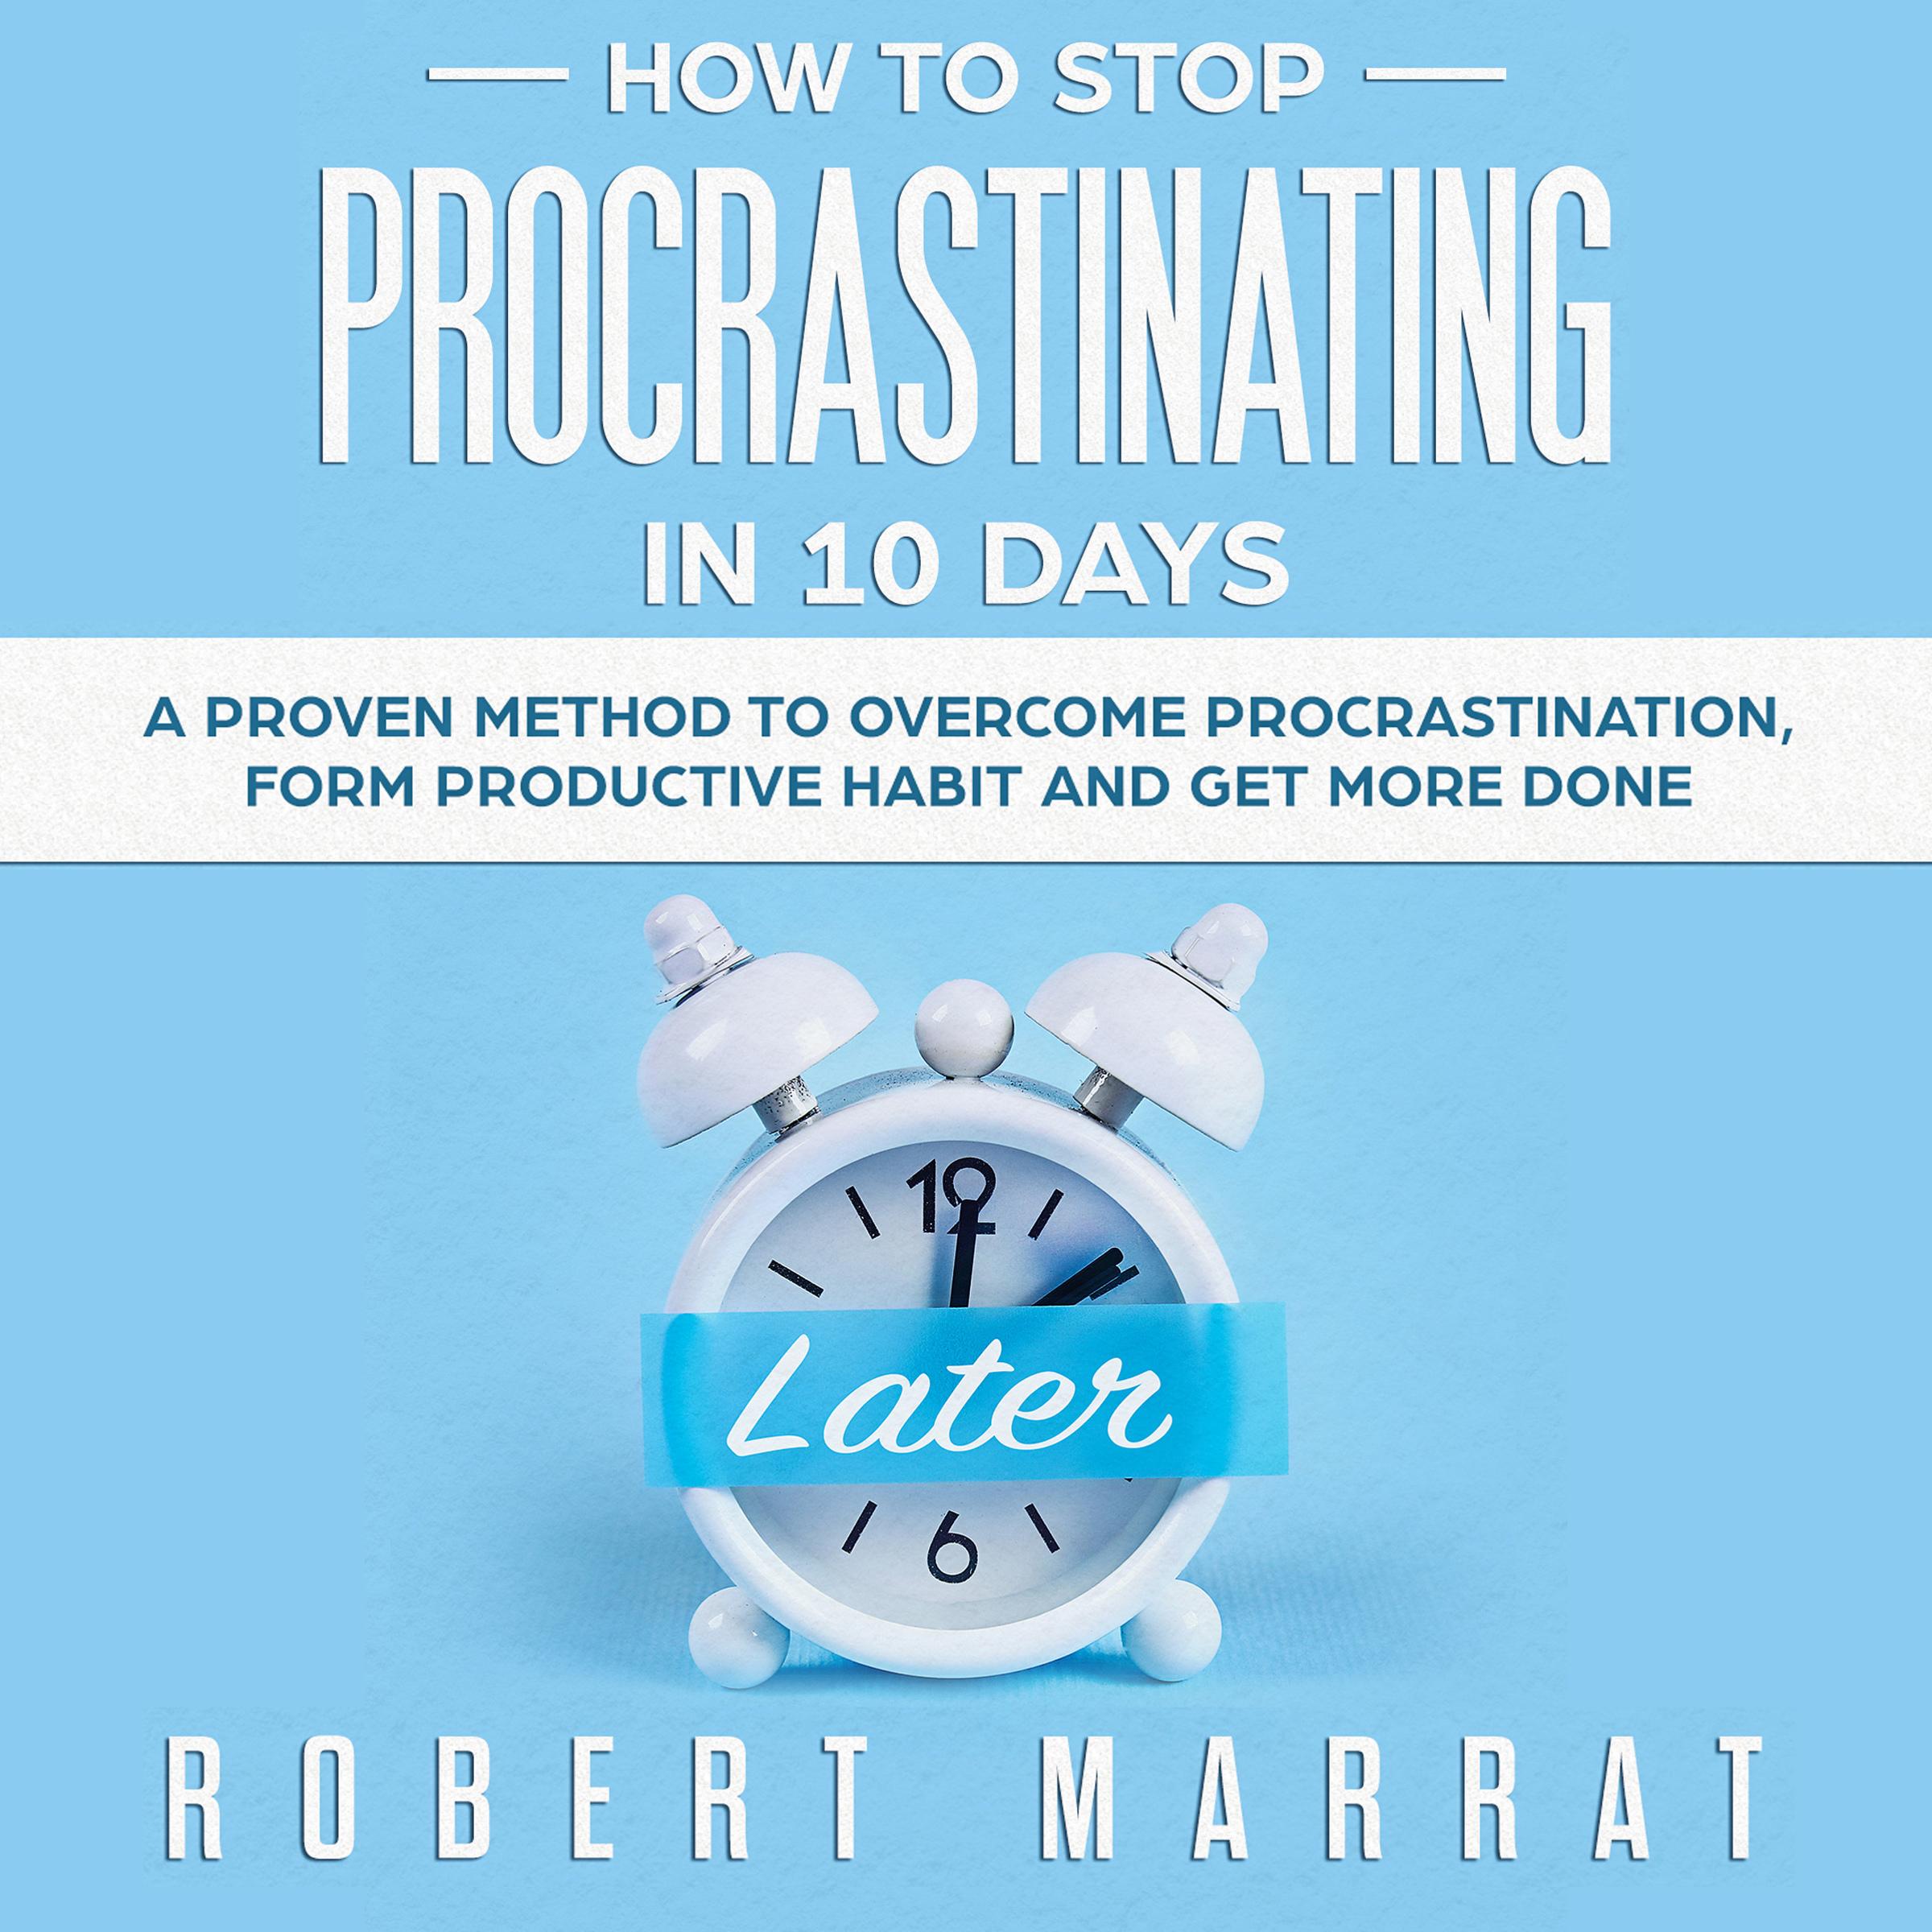 How to Stop Procrastinating in 10 Days